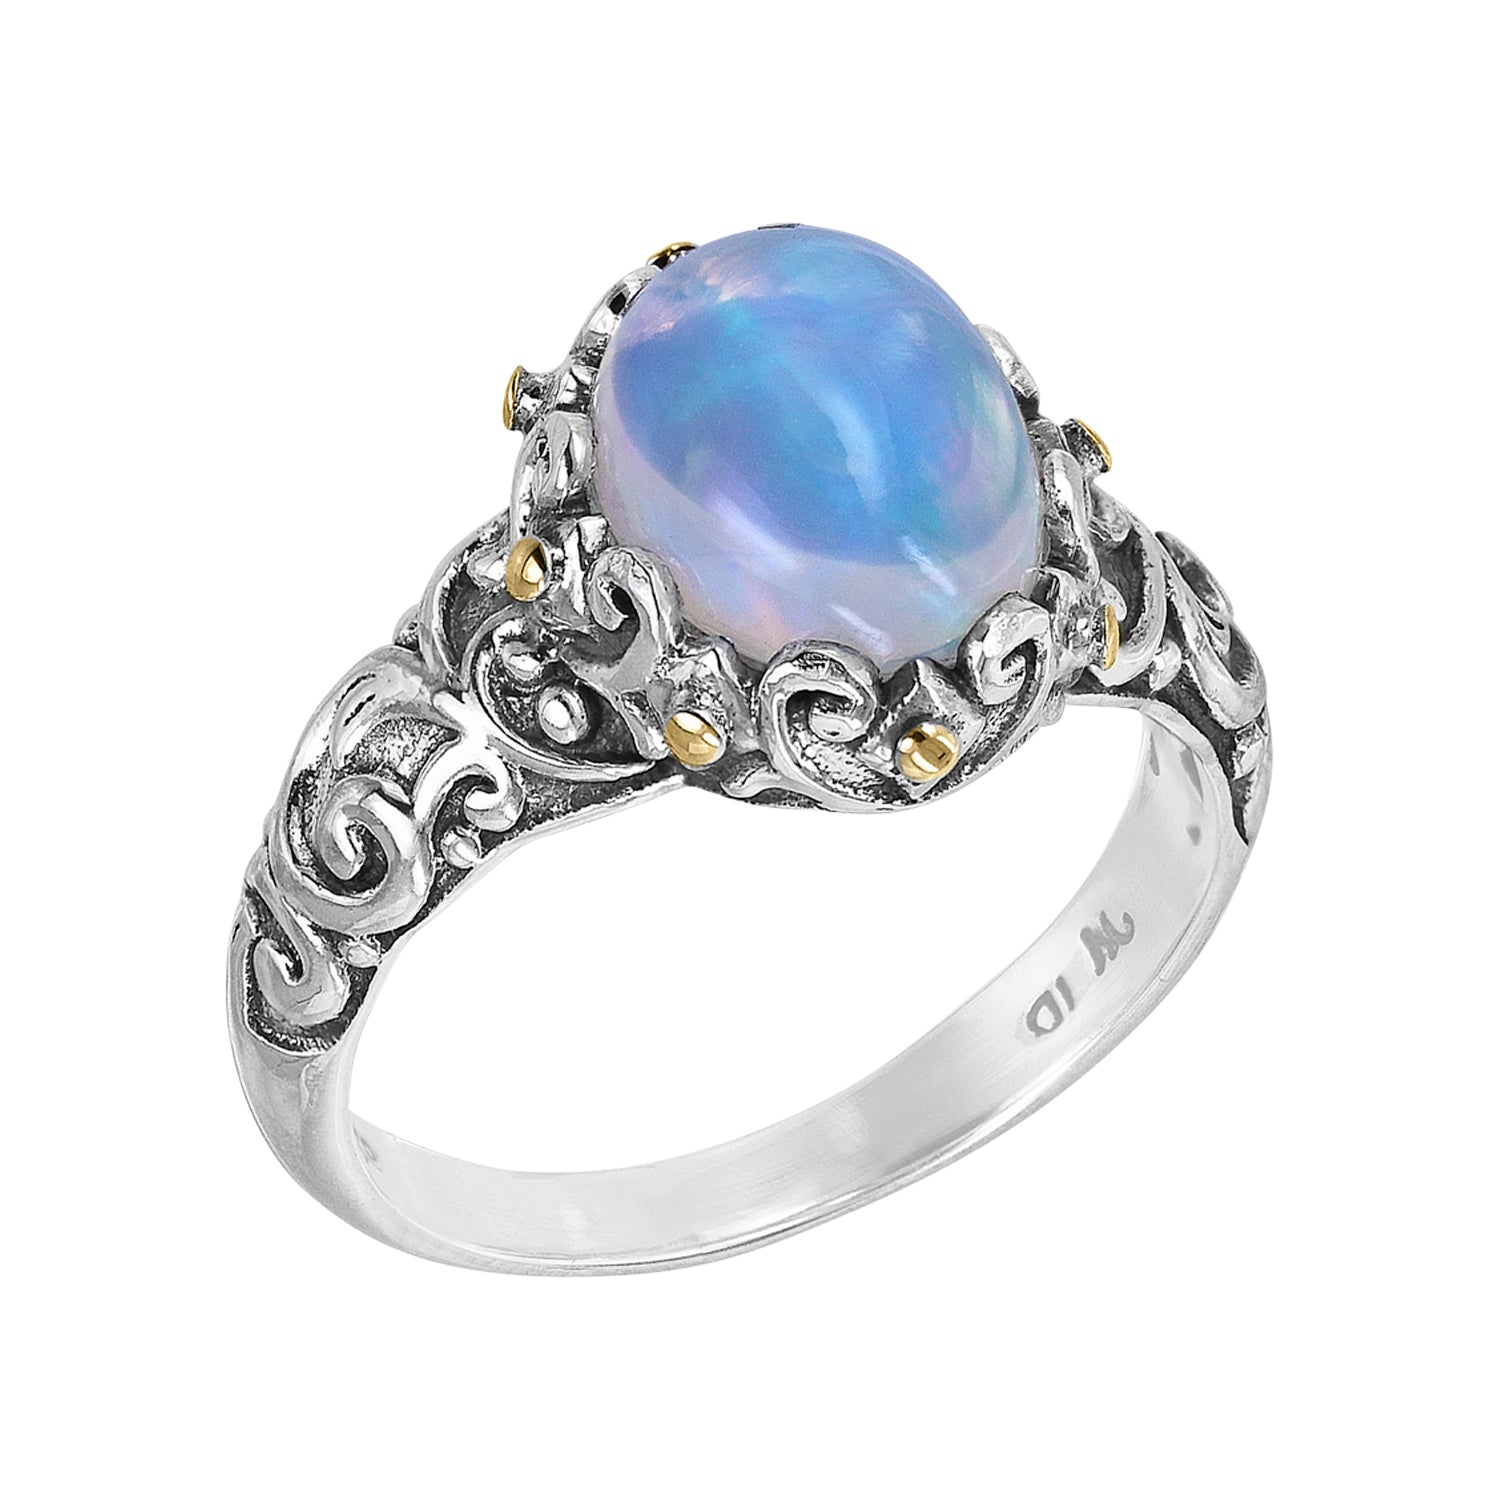 Sterling Silver Ethiopian Opal Bali Scroll Ring with 18K Gold Accents